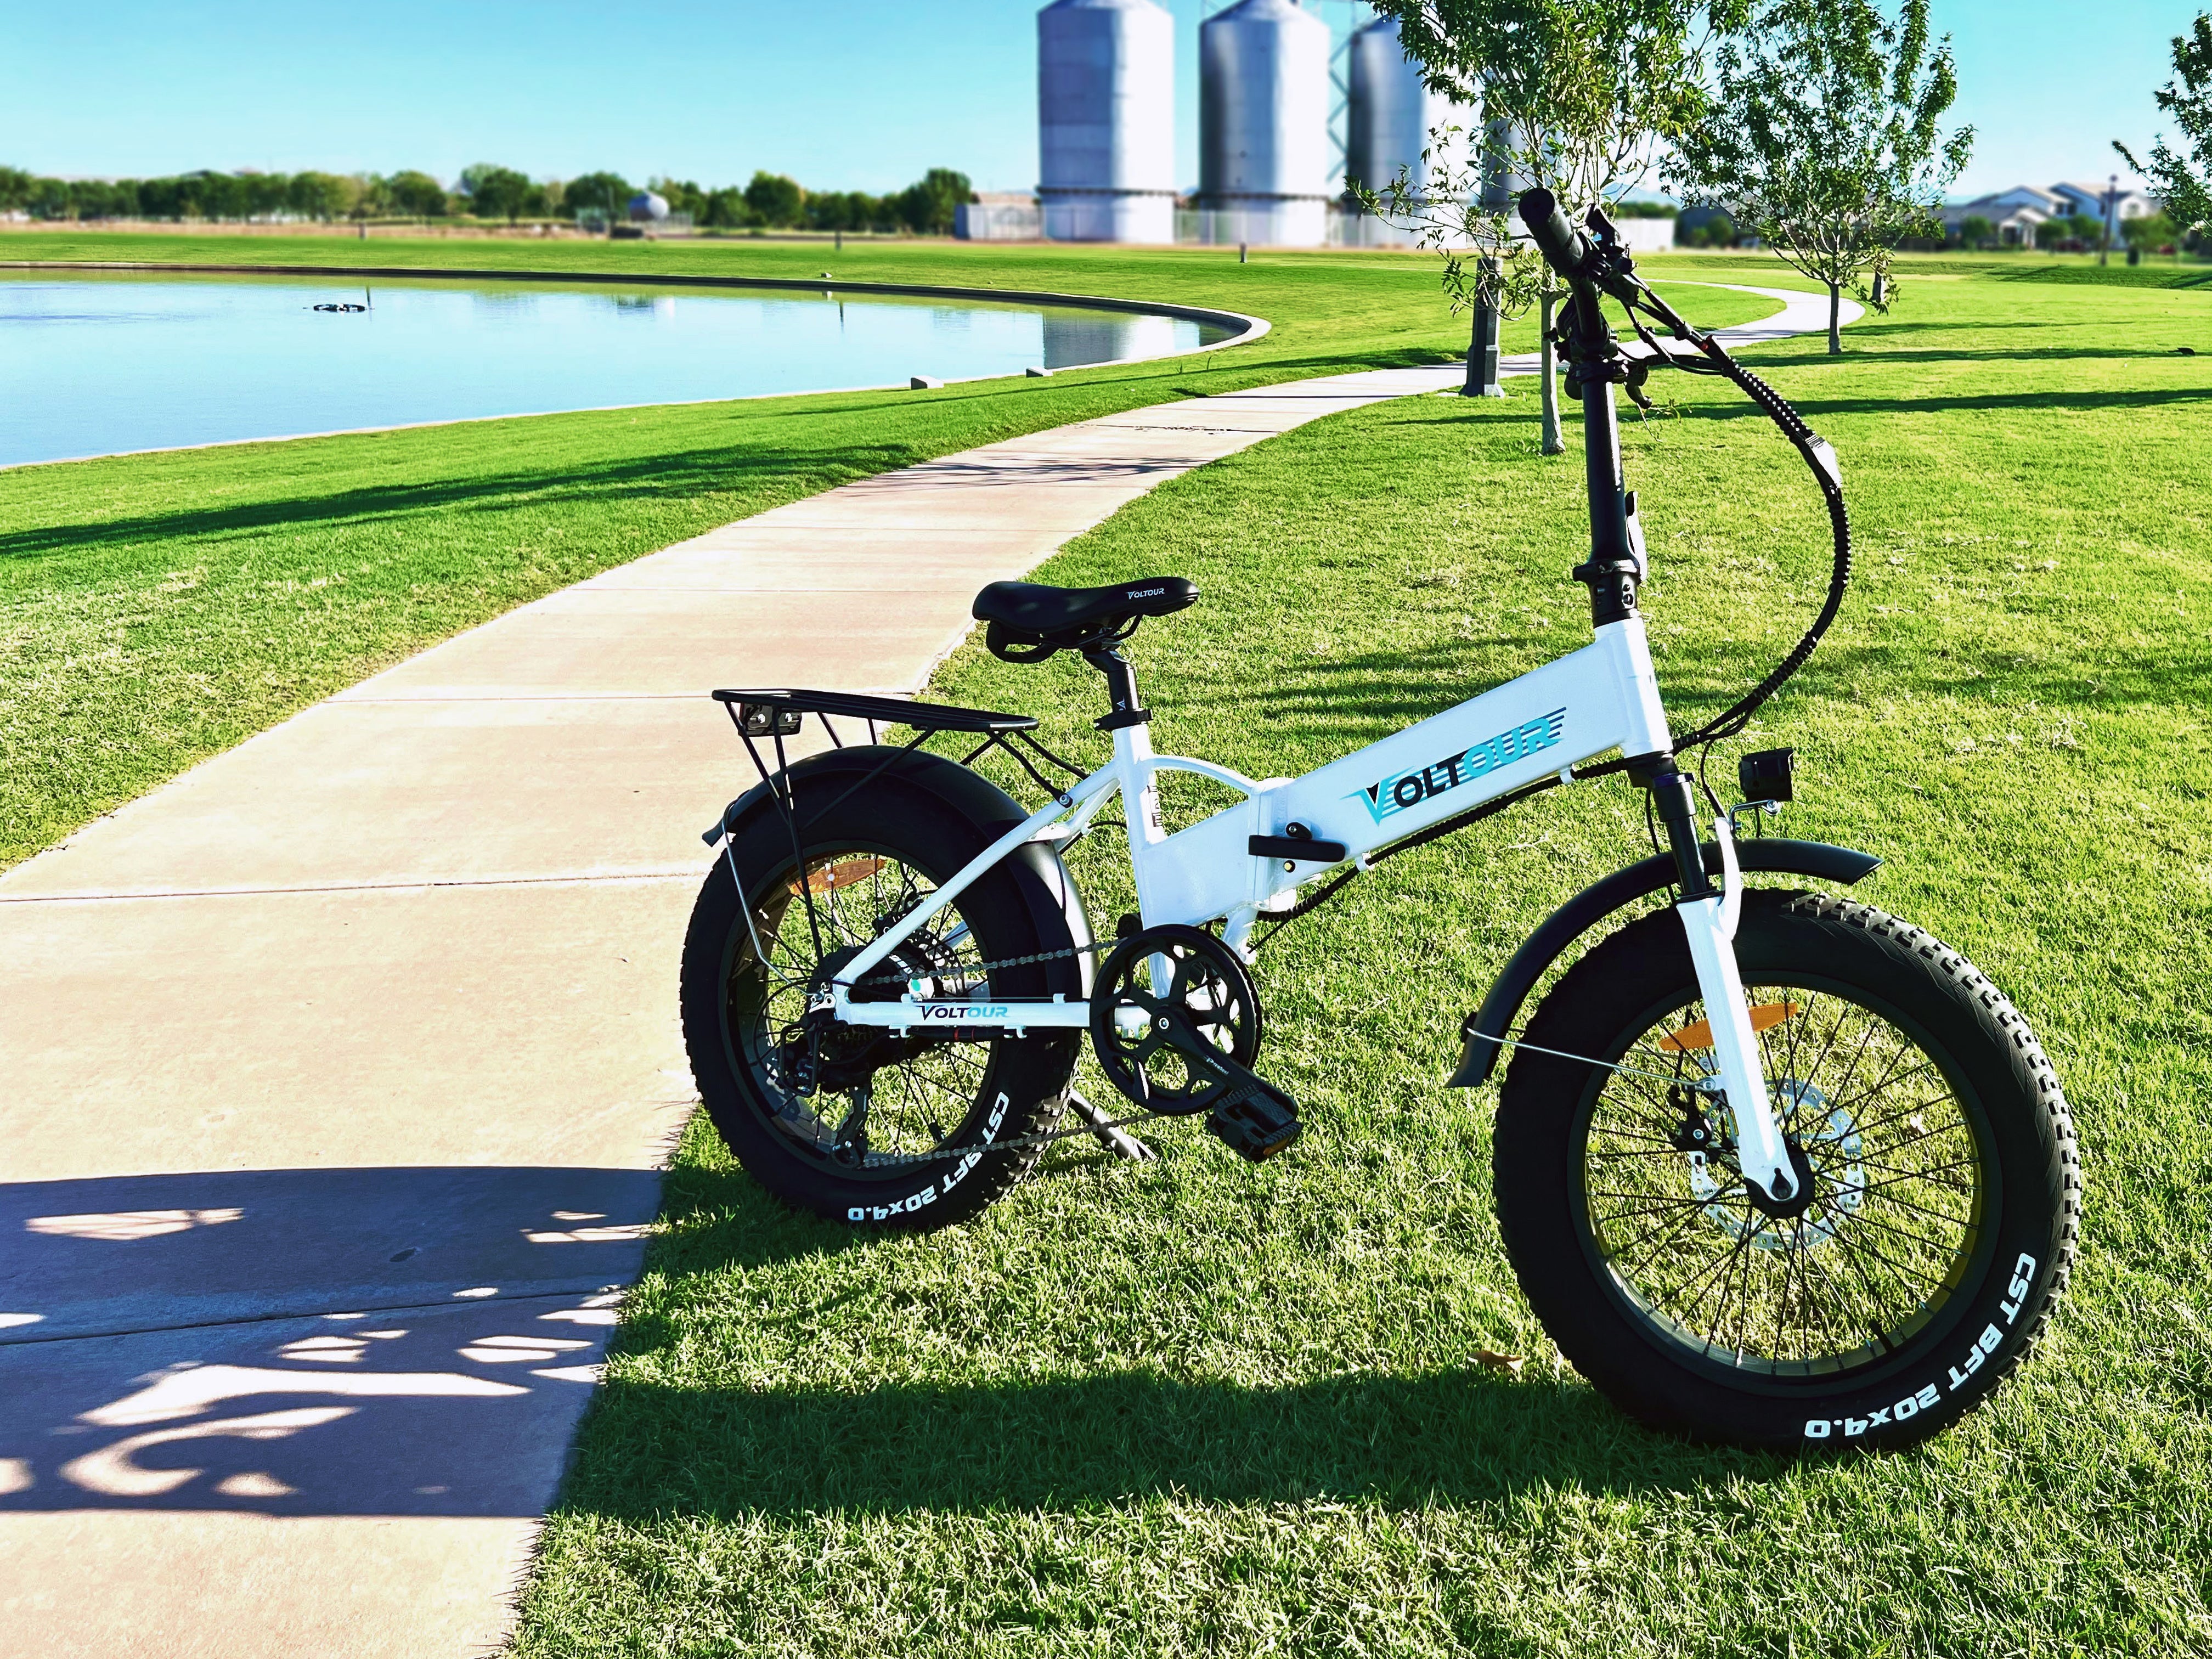 white-electric-bike-on-grass-with-lake-in-background